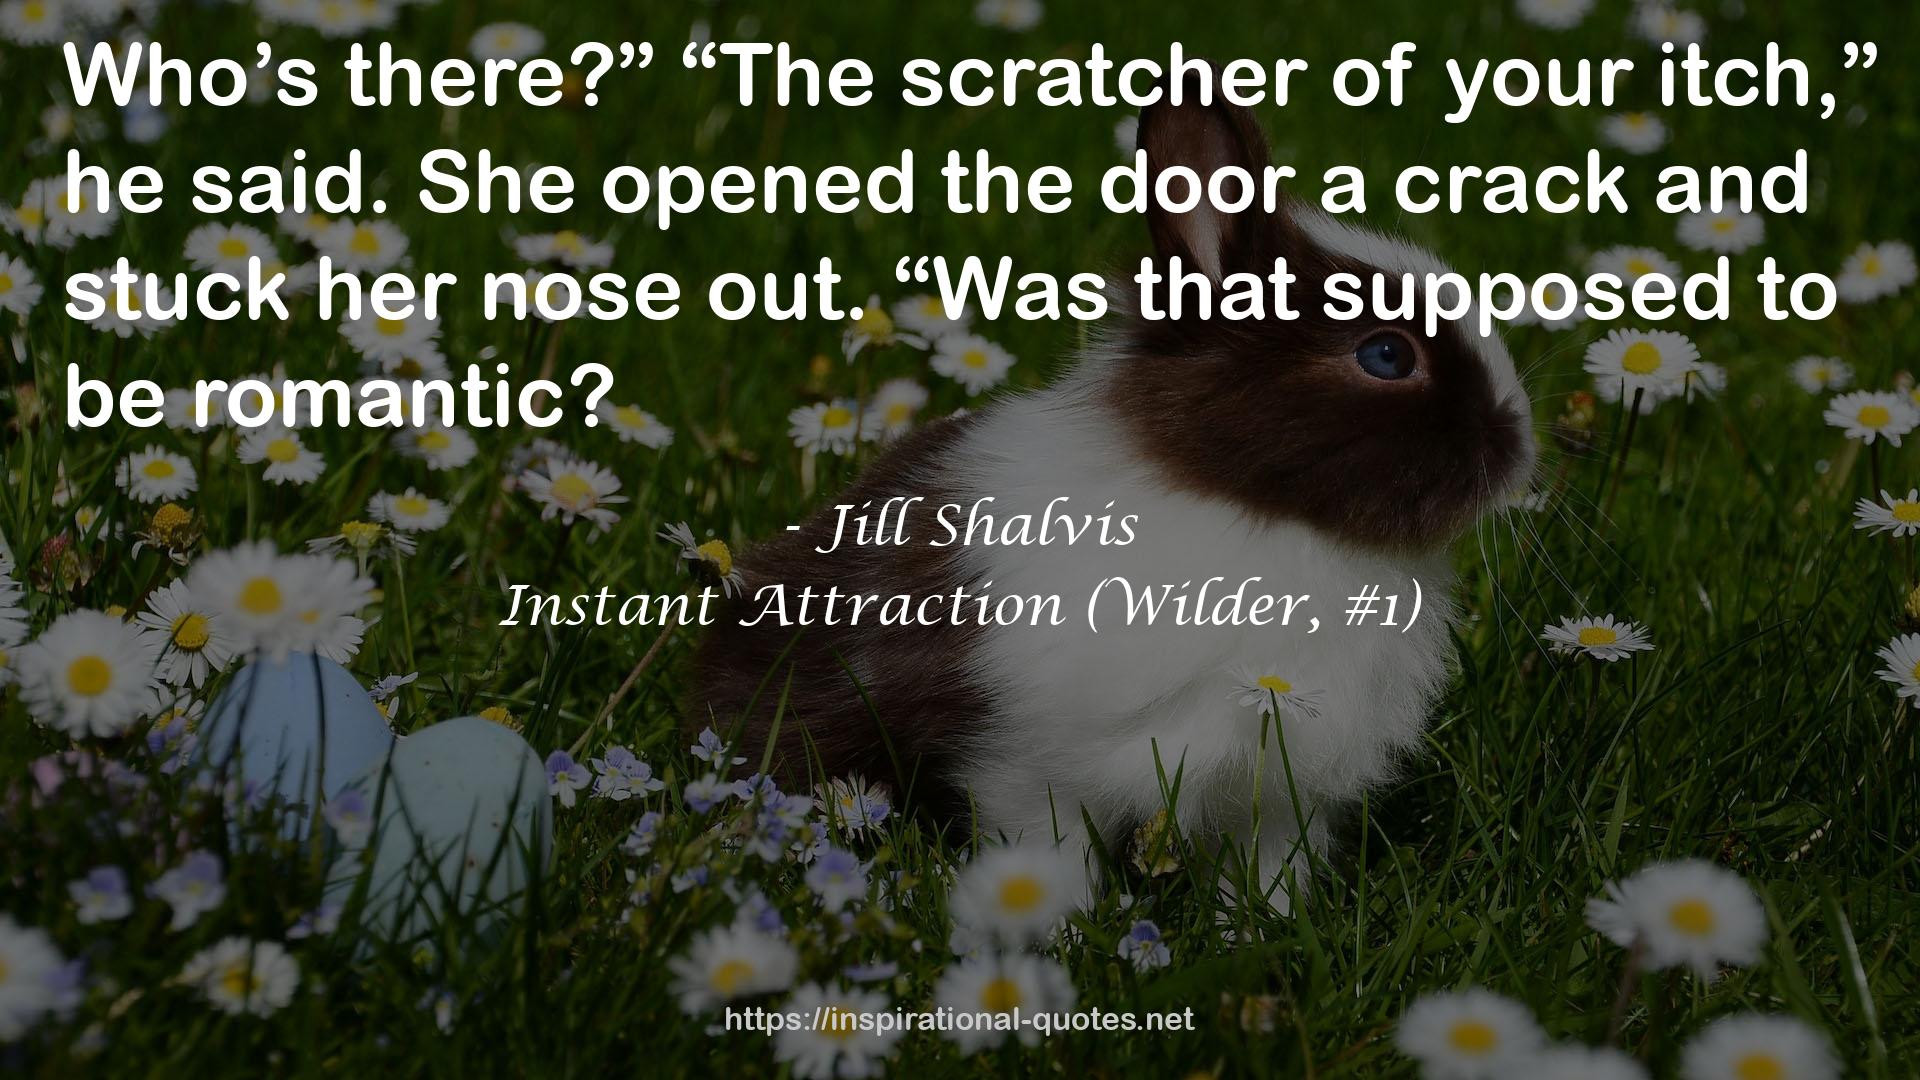 Instant Attraction (Wilder, #1) QUOTES